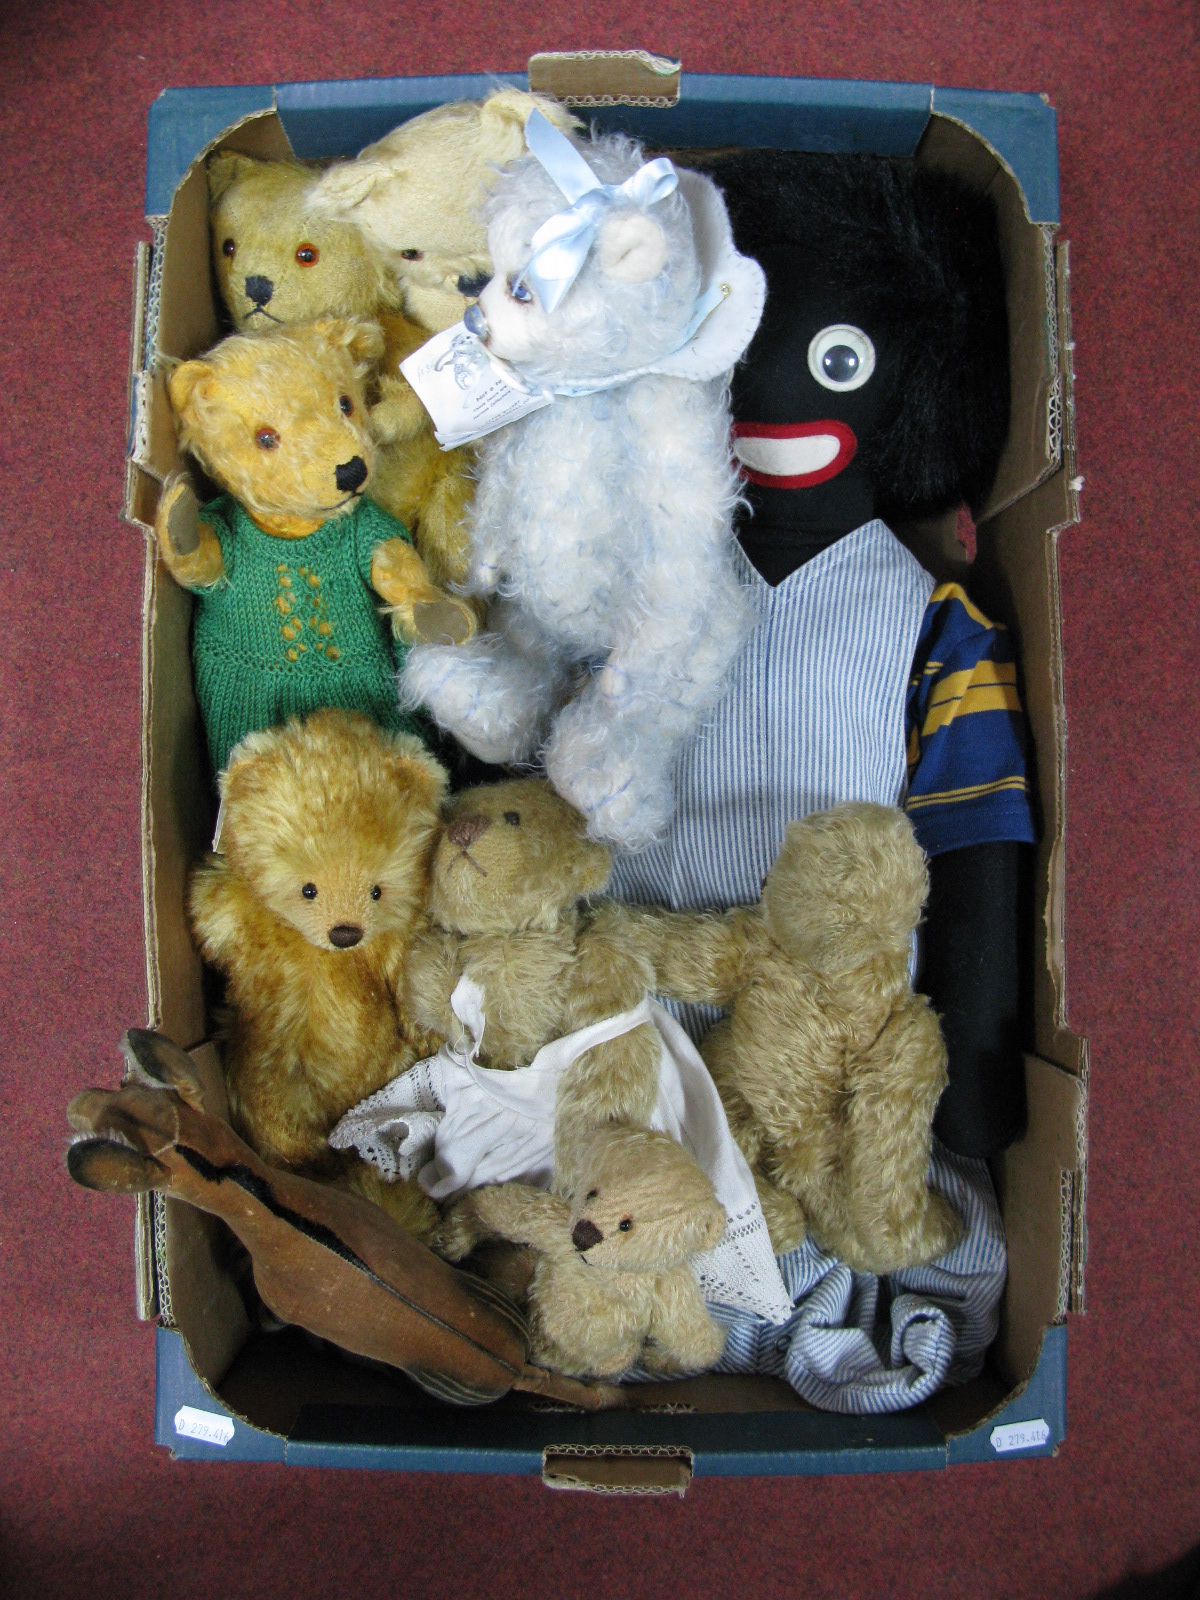 Eight Late XX to Early XXI Century Well Loved Teddy Bears, including "Baby Blue" - porcelain and